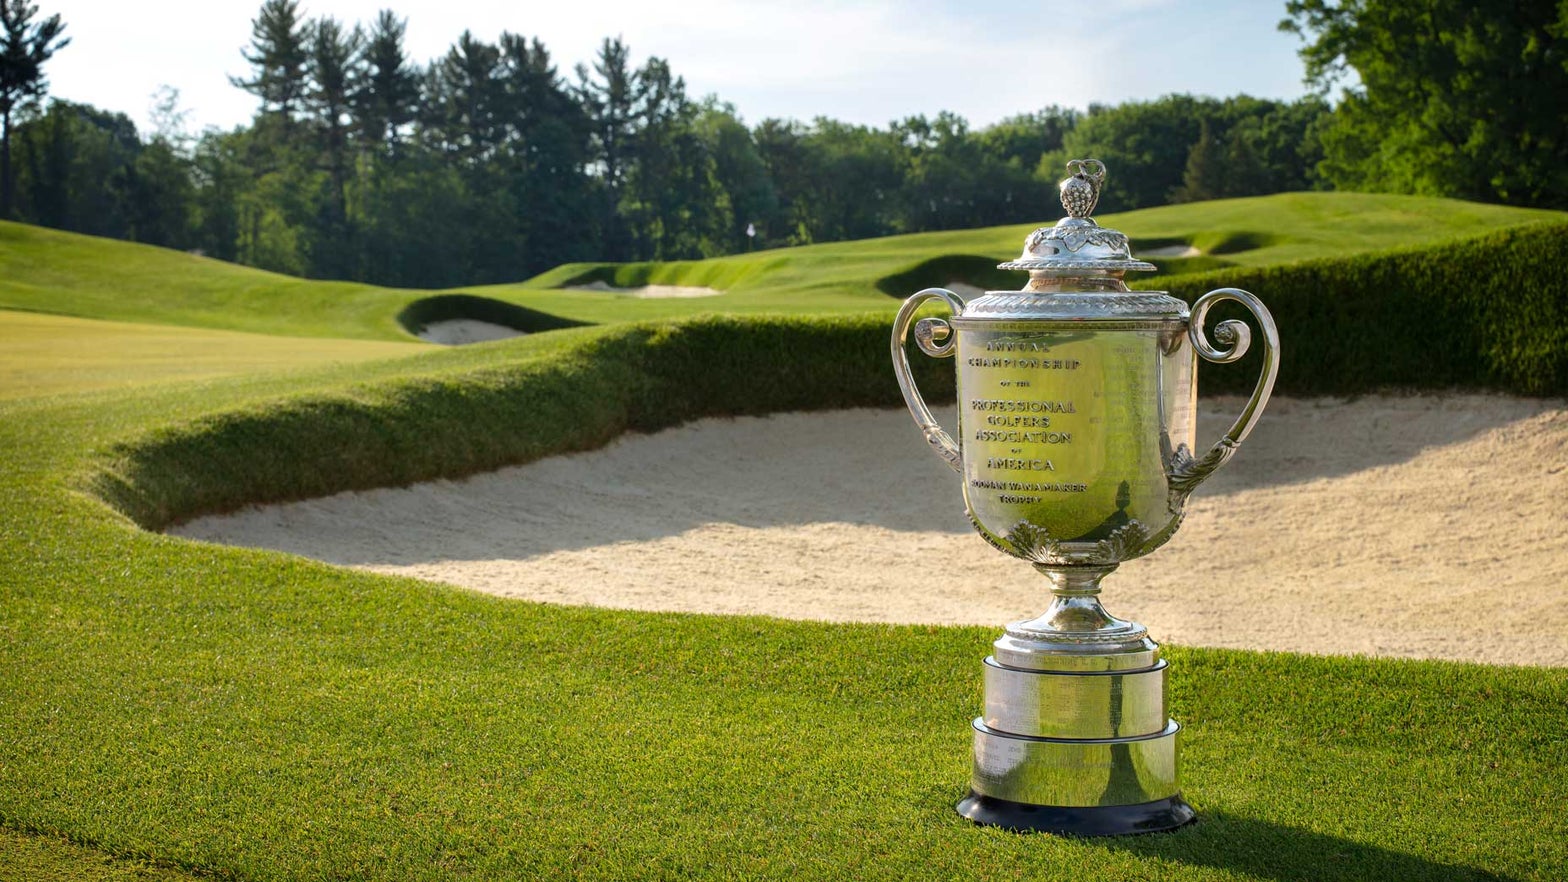 2023 PGA Championship field: Here’s who is playing at Oak Hill